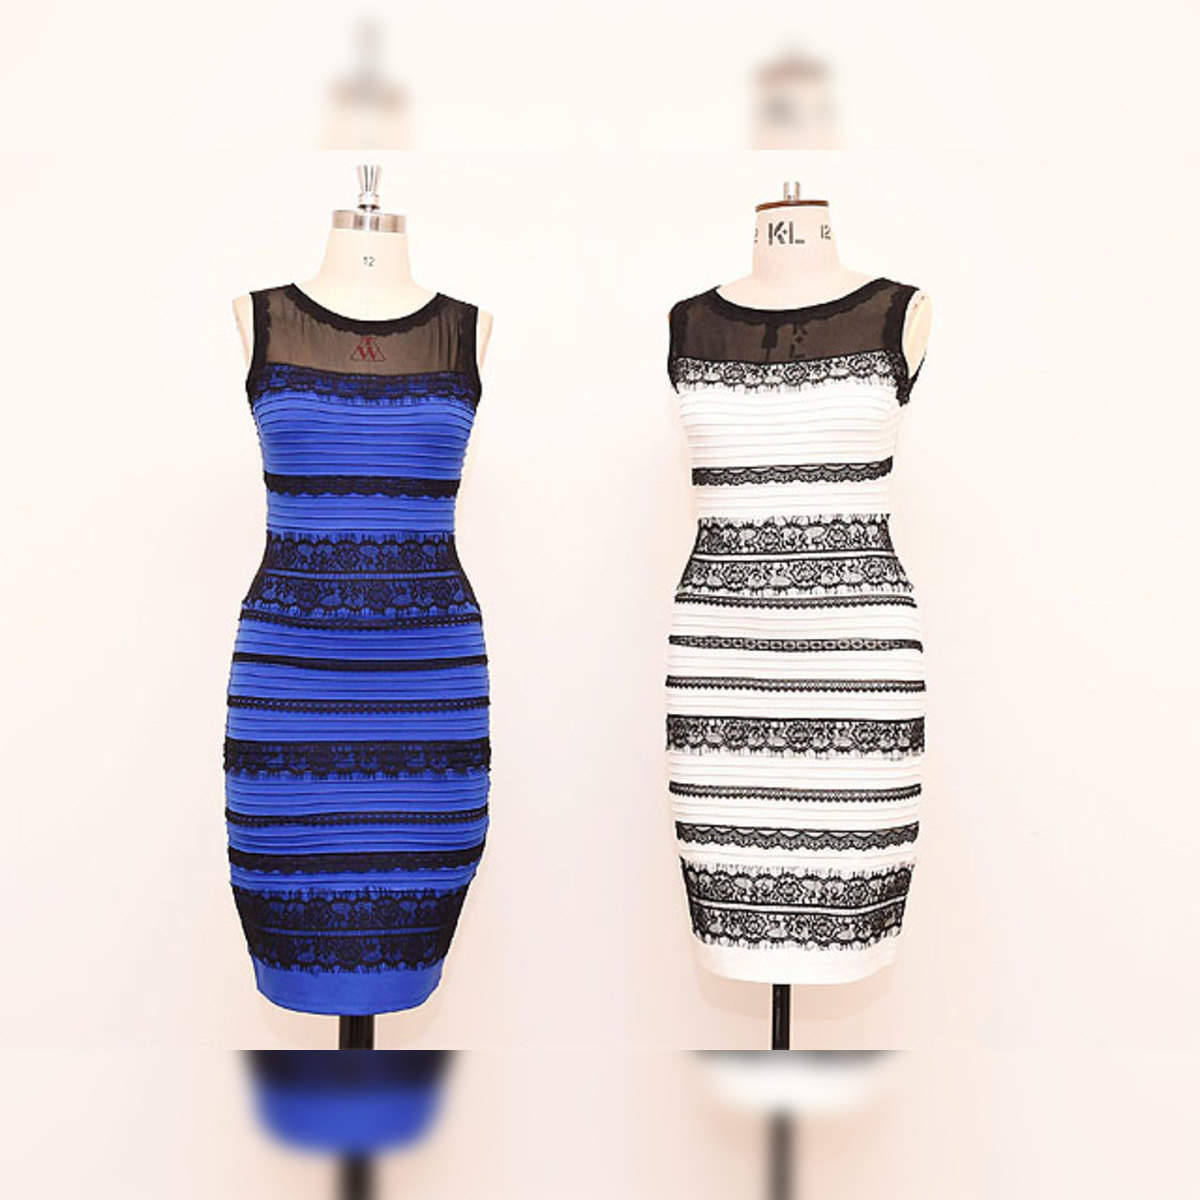 The one image that will help you understand the mystery of the white and gold  dress | Black and blue dress, White gold dress, Optical illusion dress